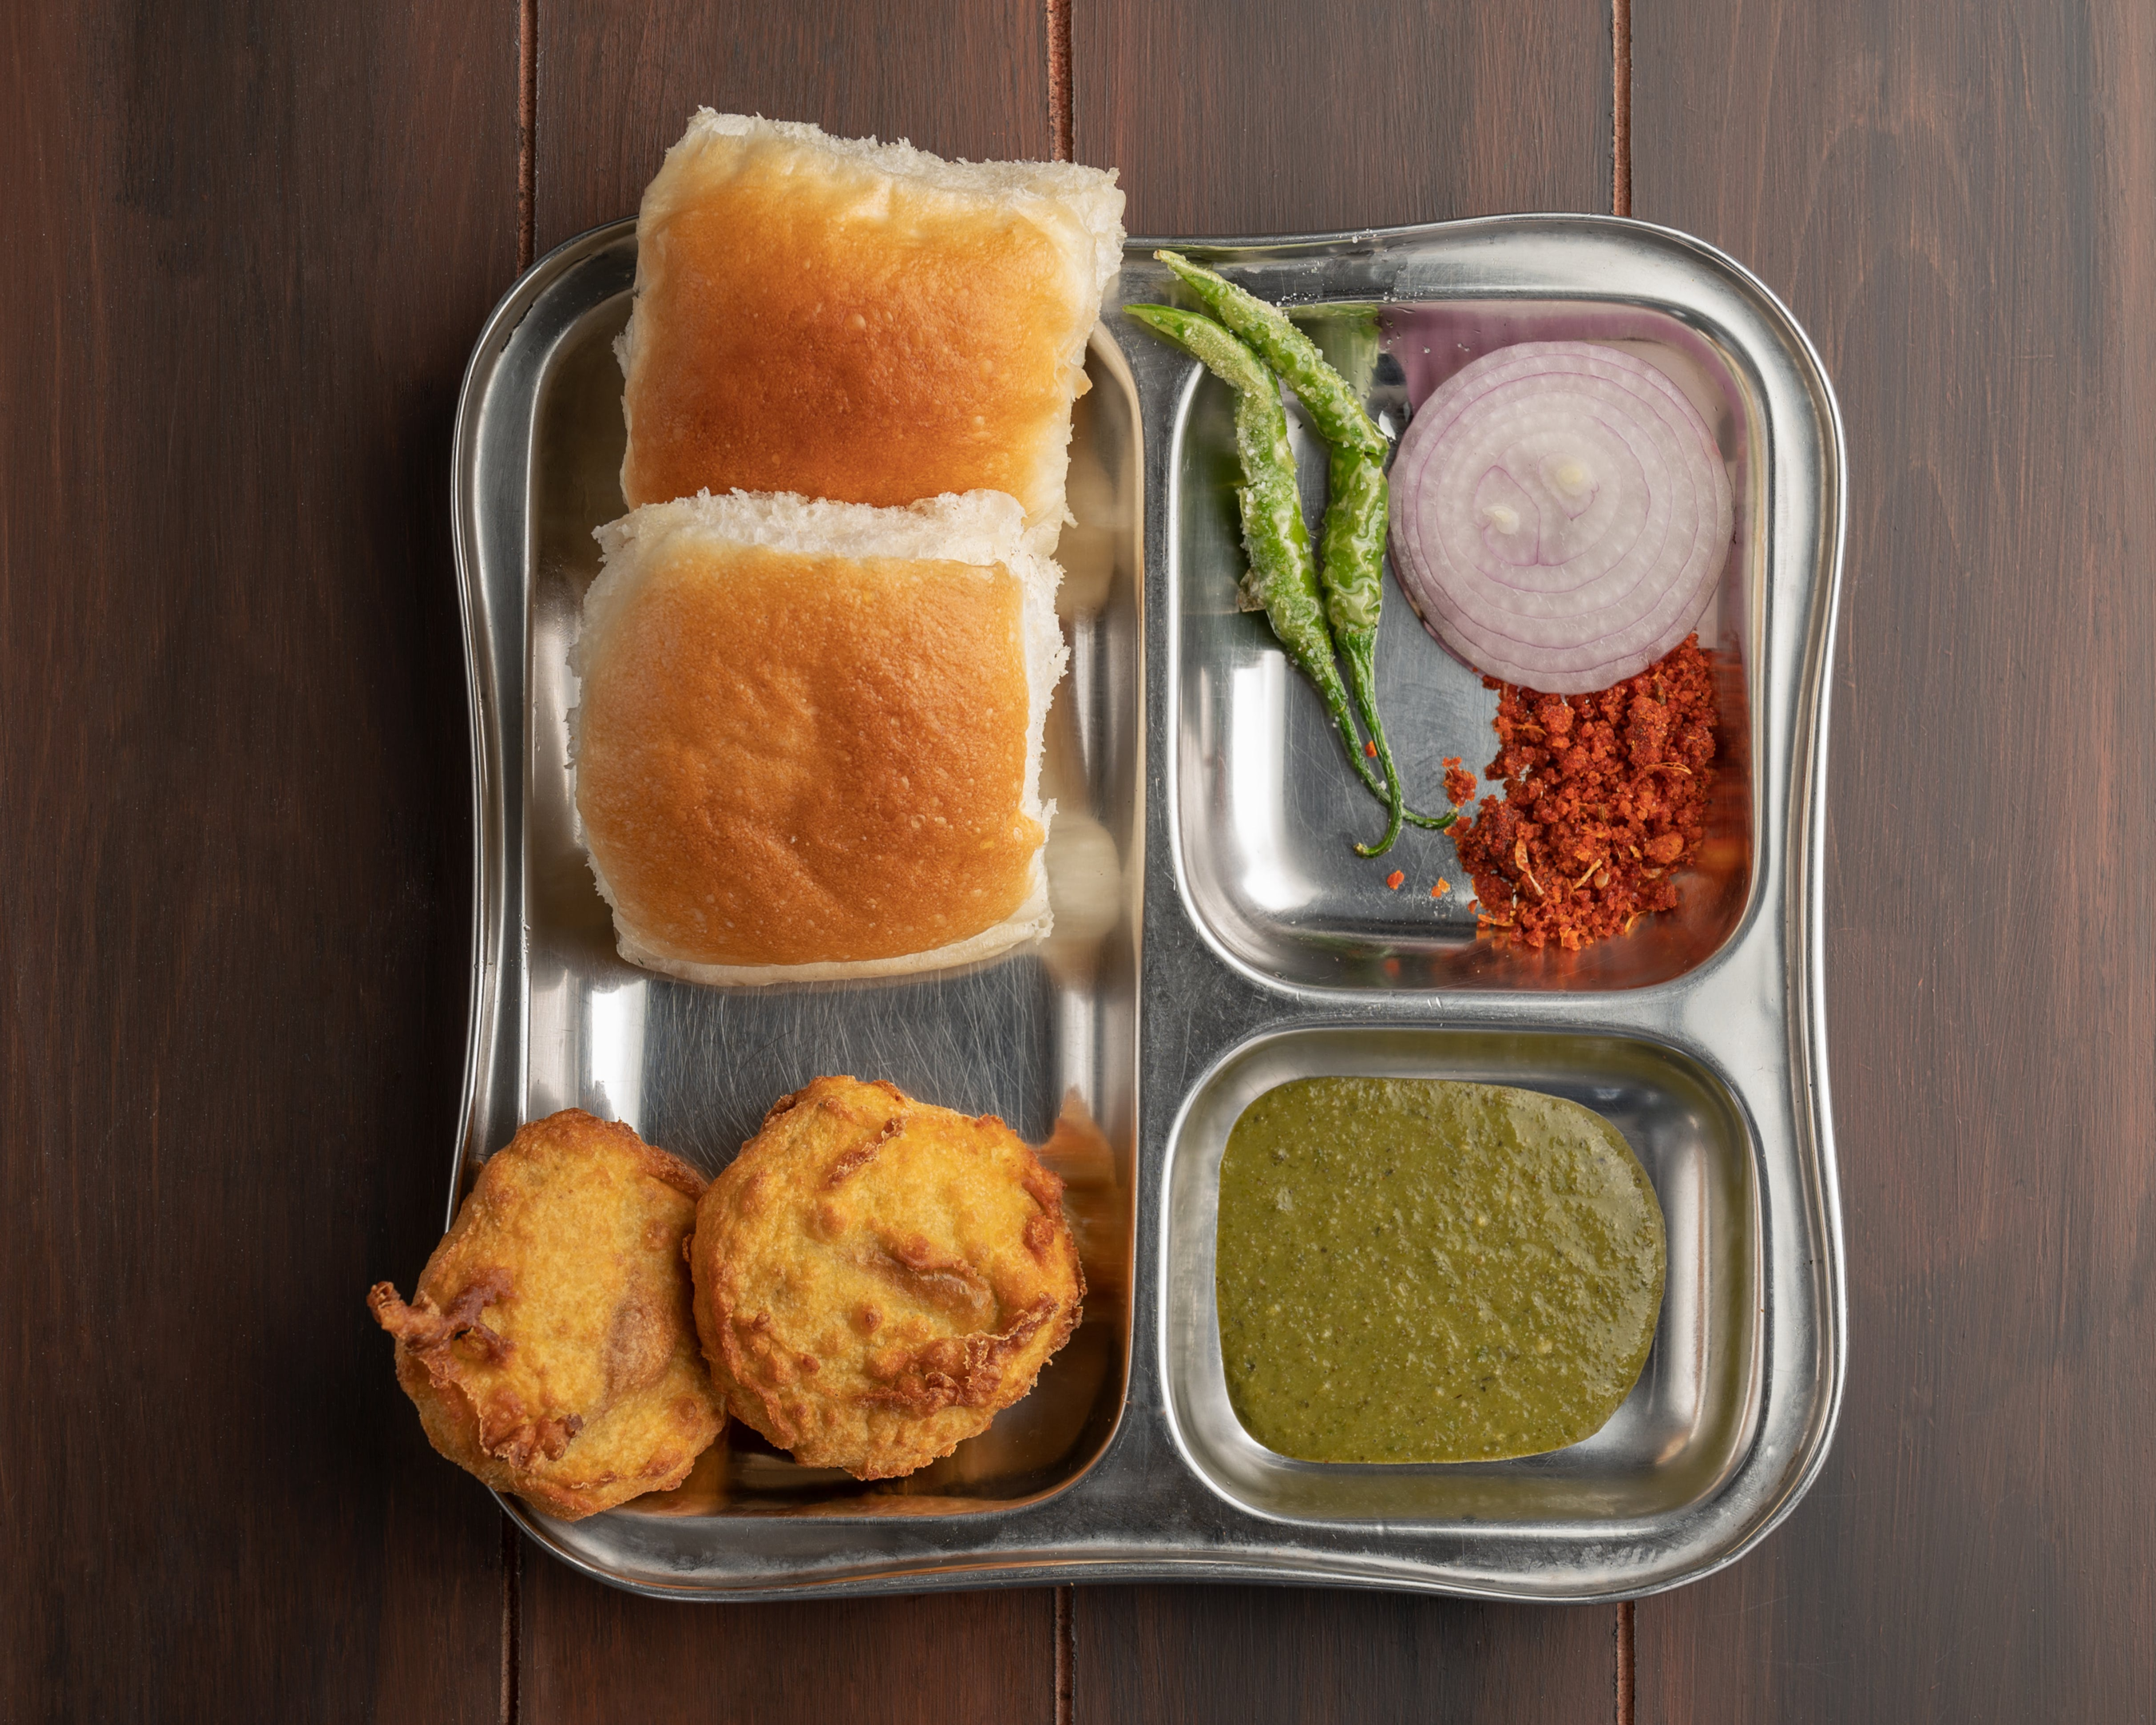 Vada Pav - Traditional Indian street food, consisting of a spicy potato patty served with a bun.